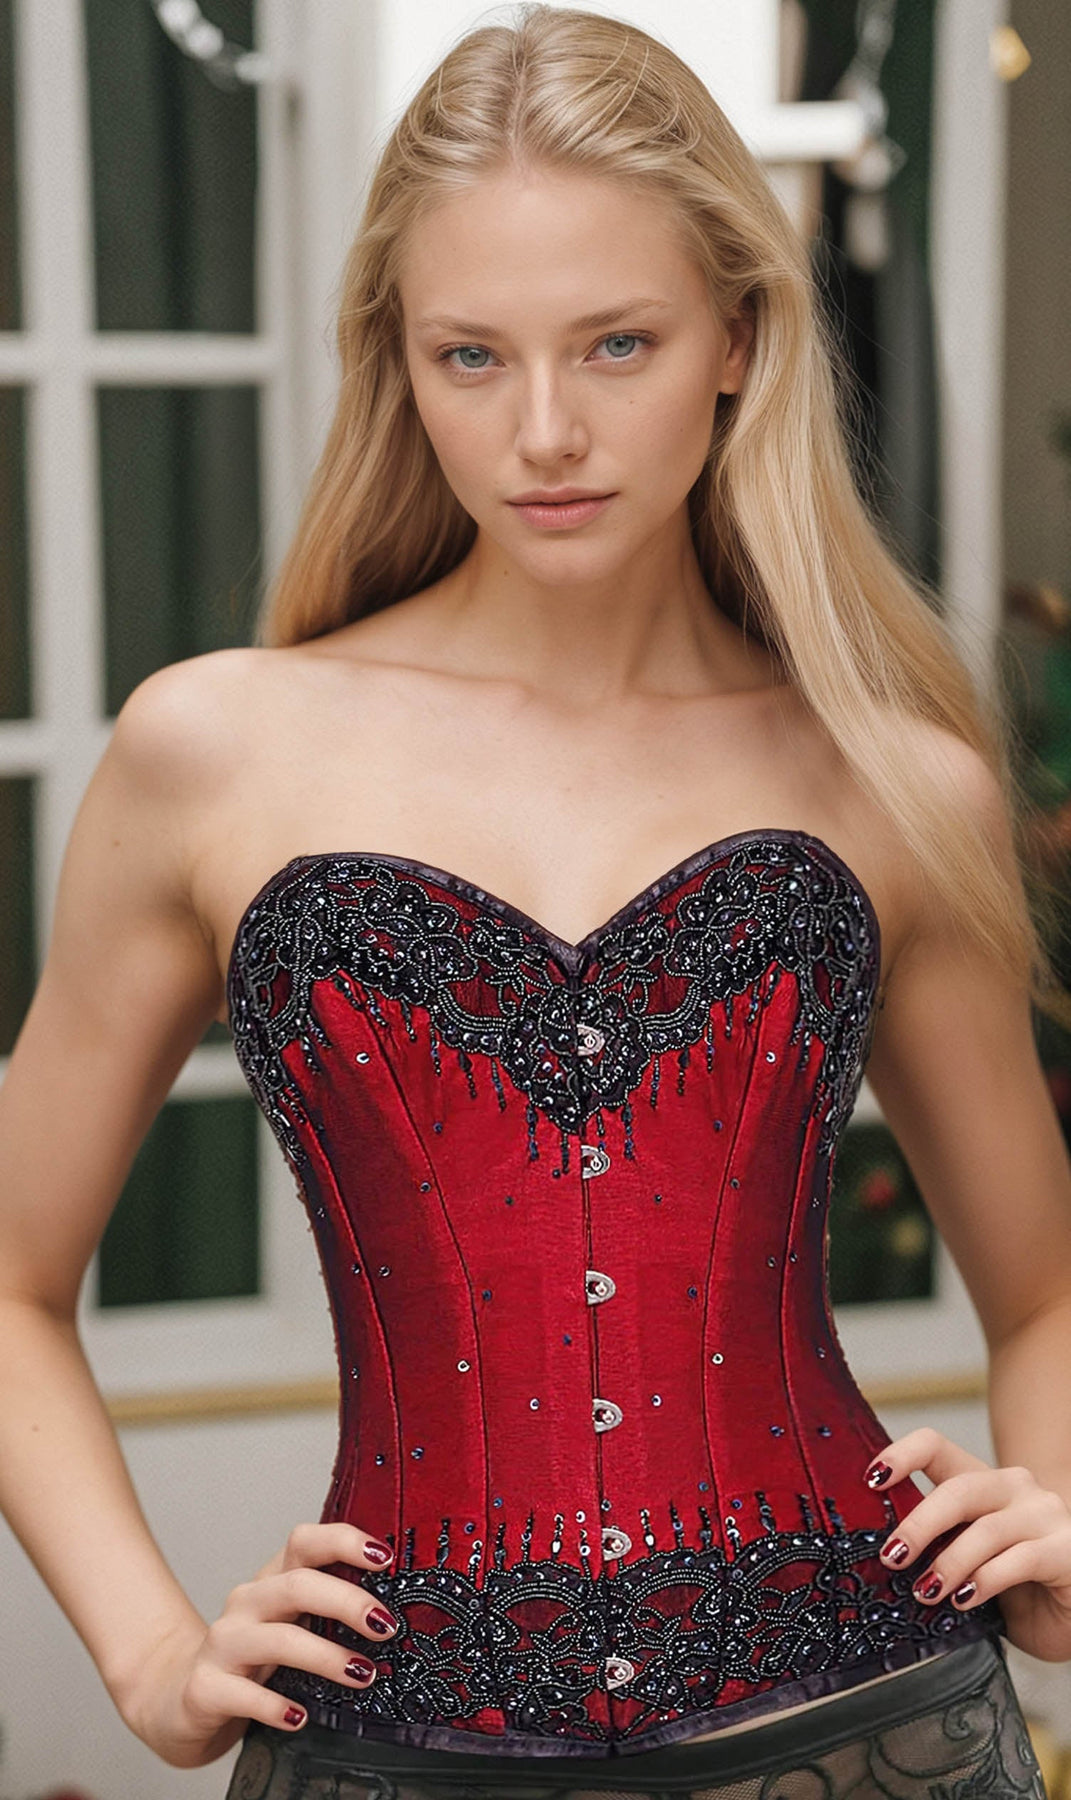 Bespoke Corset- Our Amazing Couture Corset Designs are Here